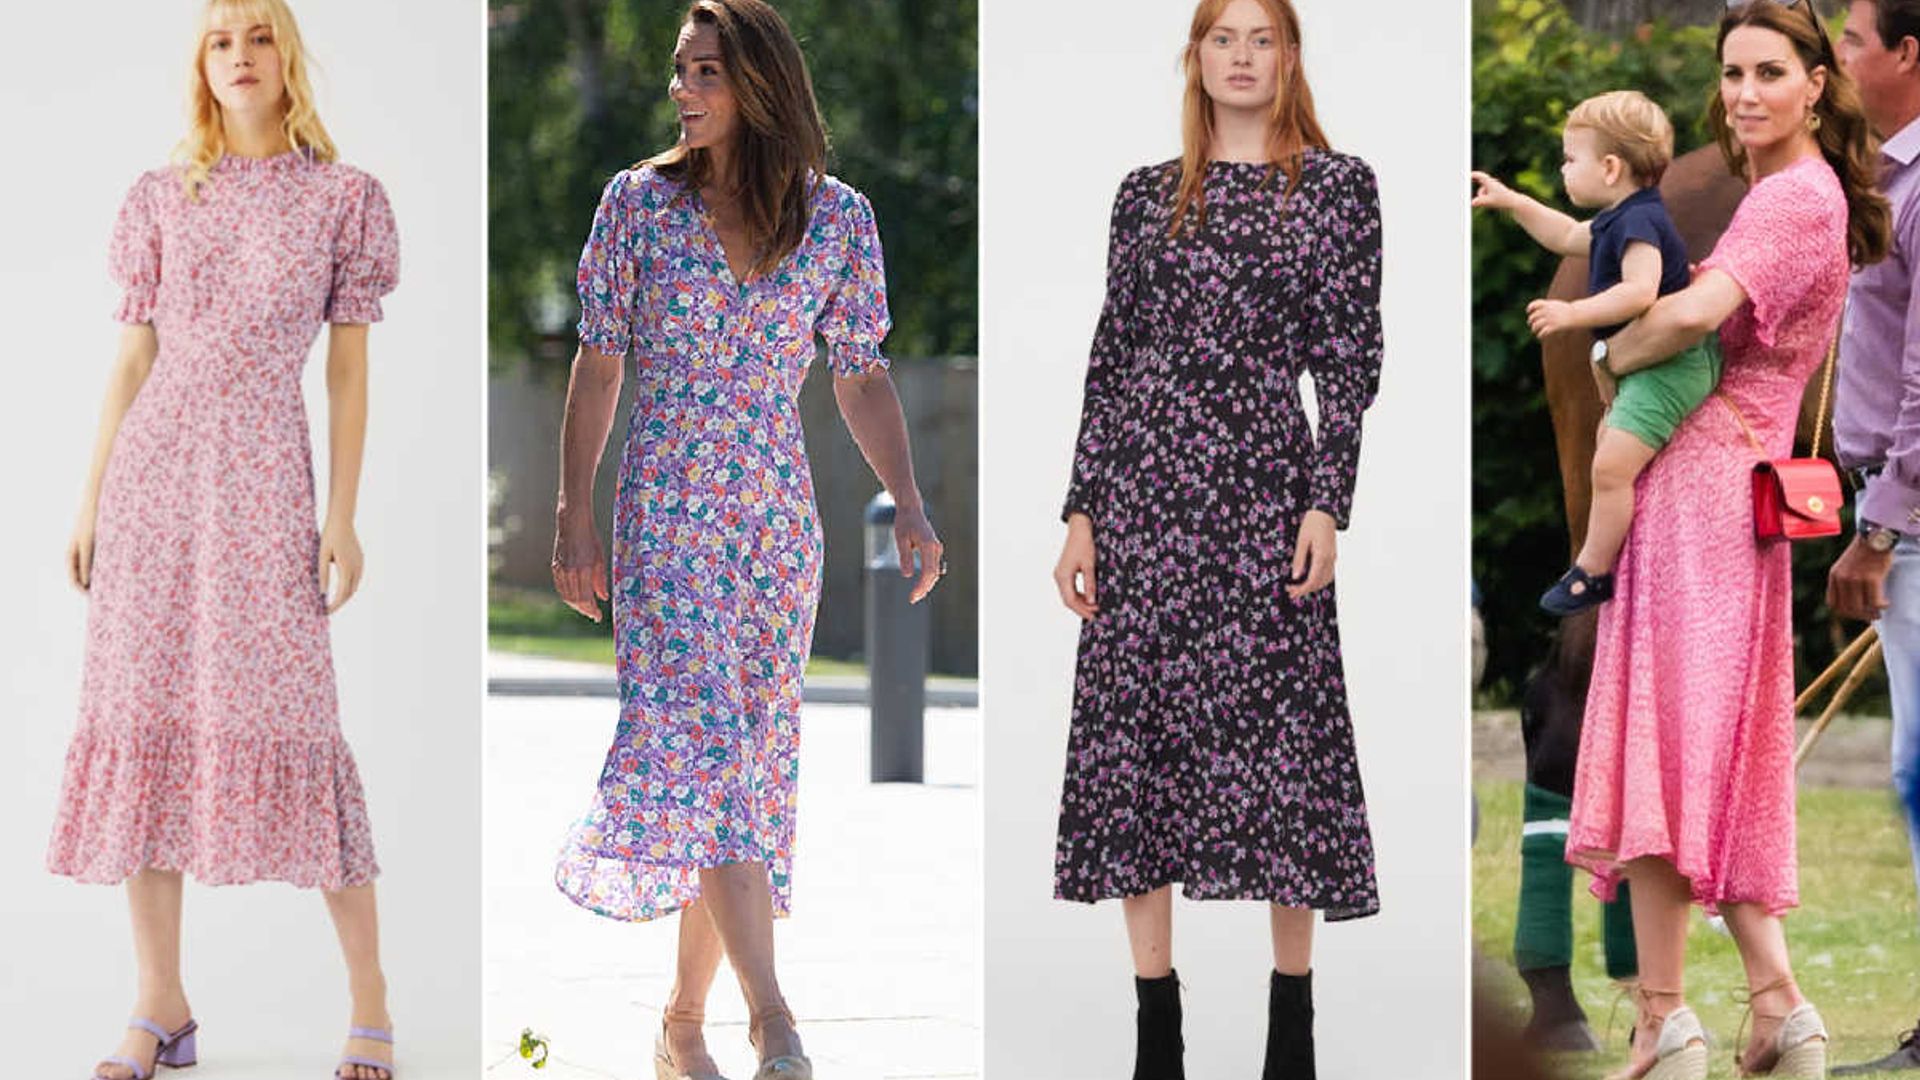 10 ditsy floral print dresses Kate Middleton would definitely wear – shop the Duchess' style | HELLO!